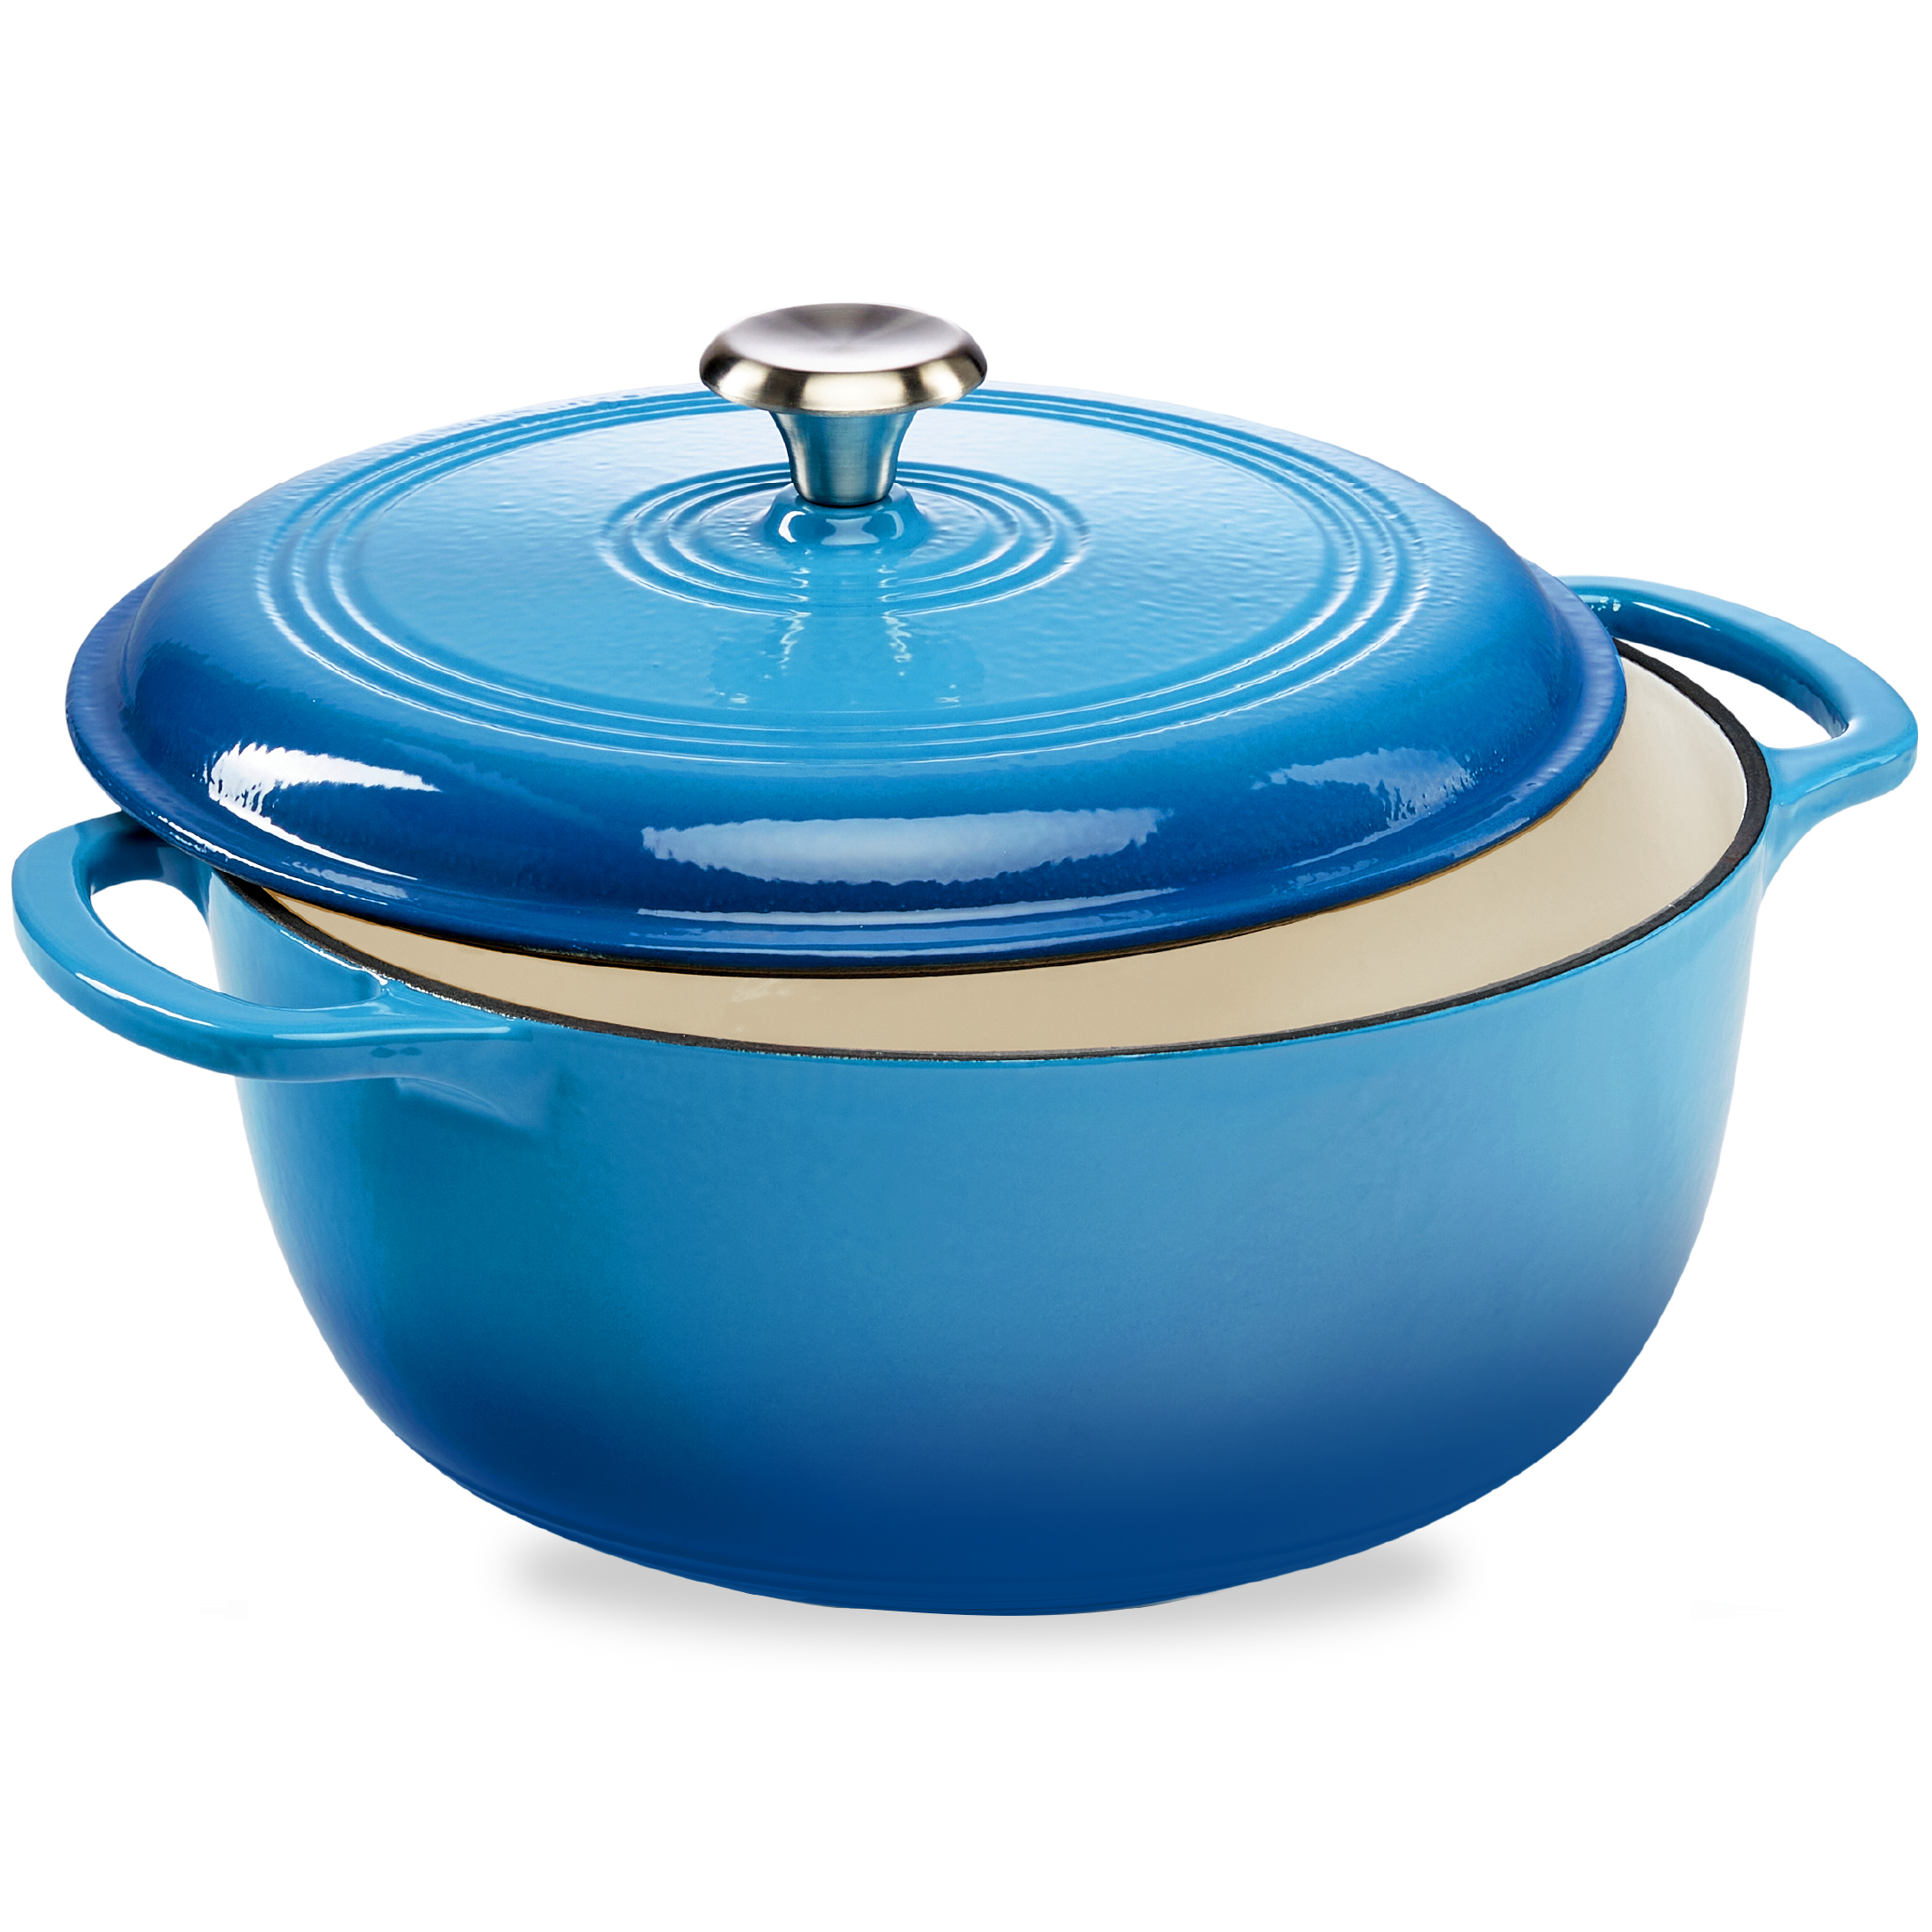 Best Choice Products 6 Quart Cast-Iron Dutch Oven, Heavy-Duty Kitchenware w/ Enamel, Side Handles - Blue - image 1 of 7